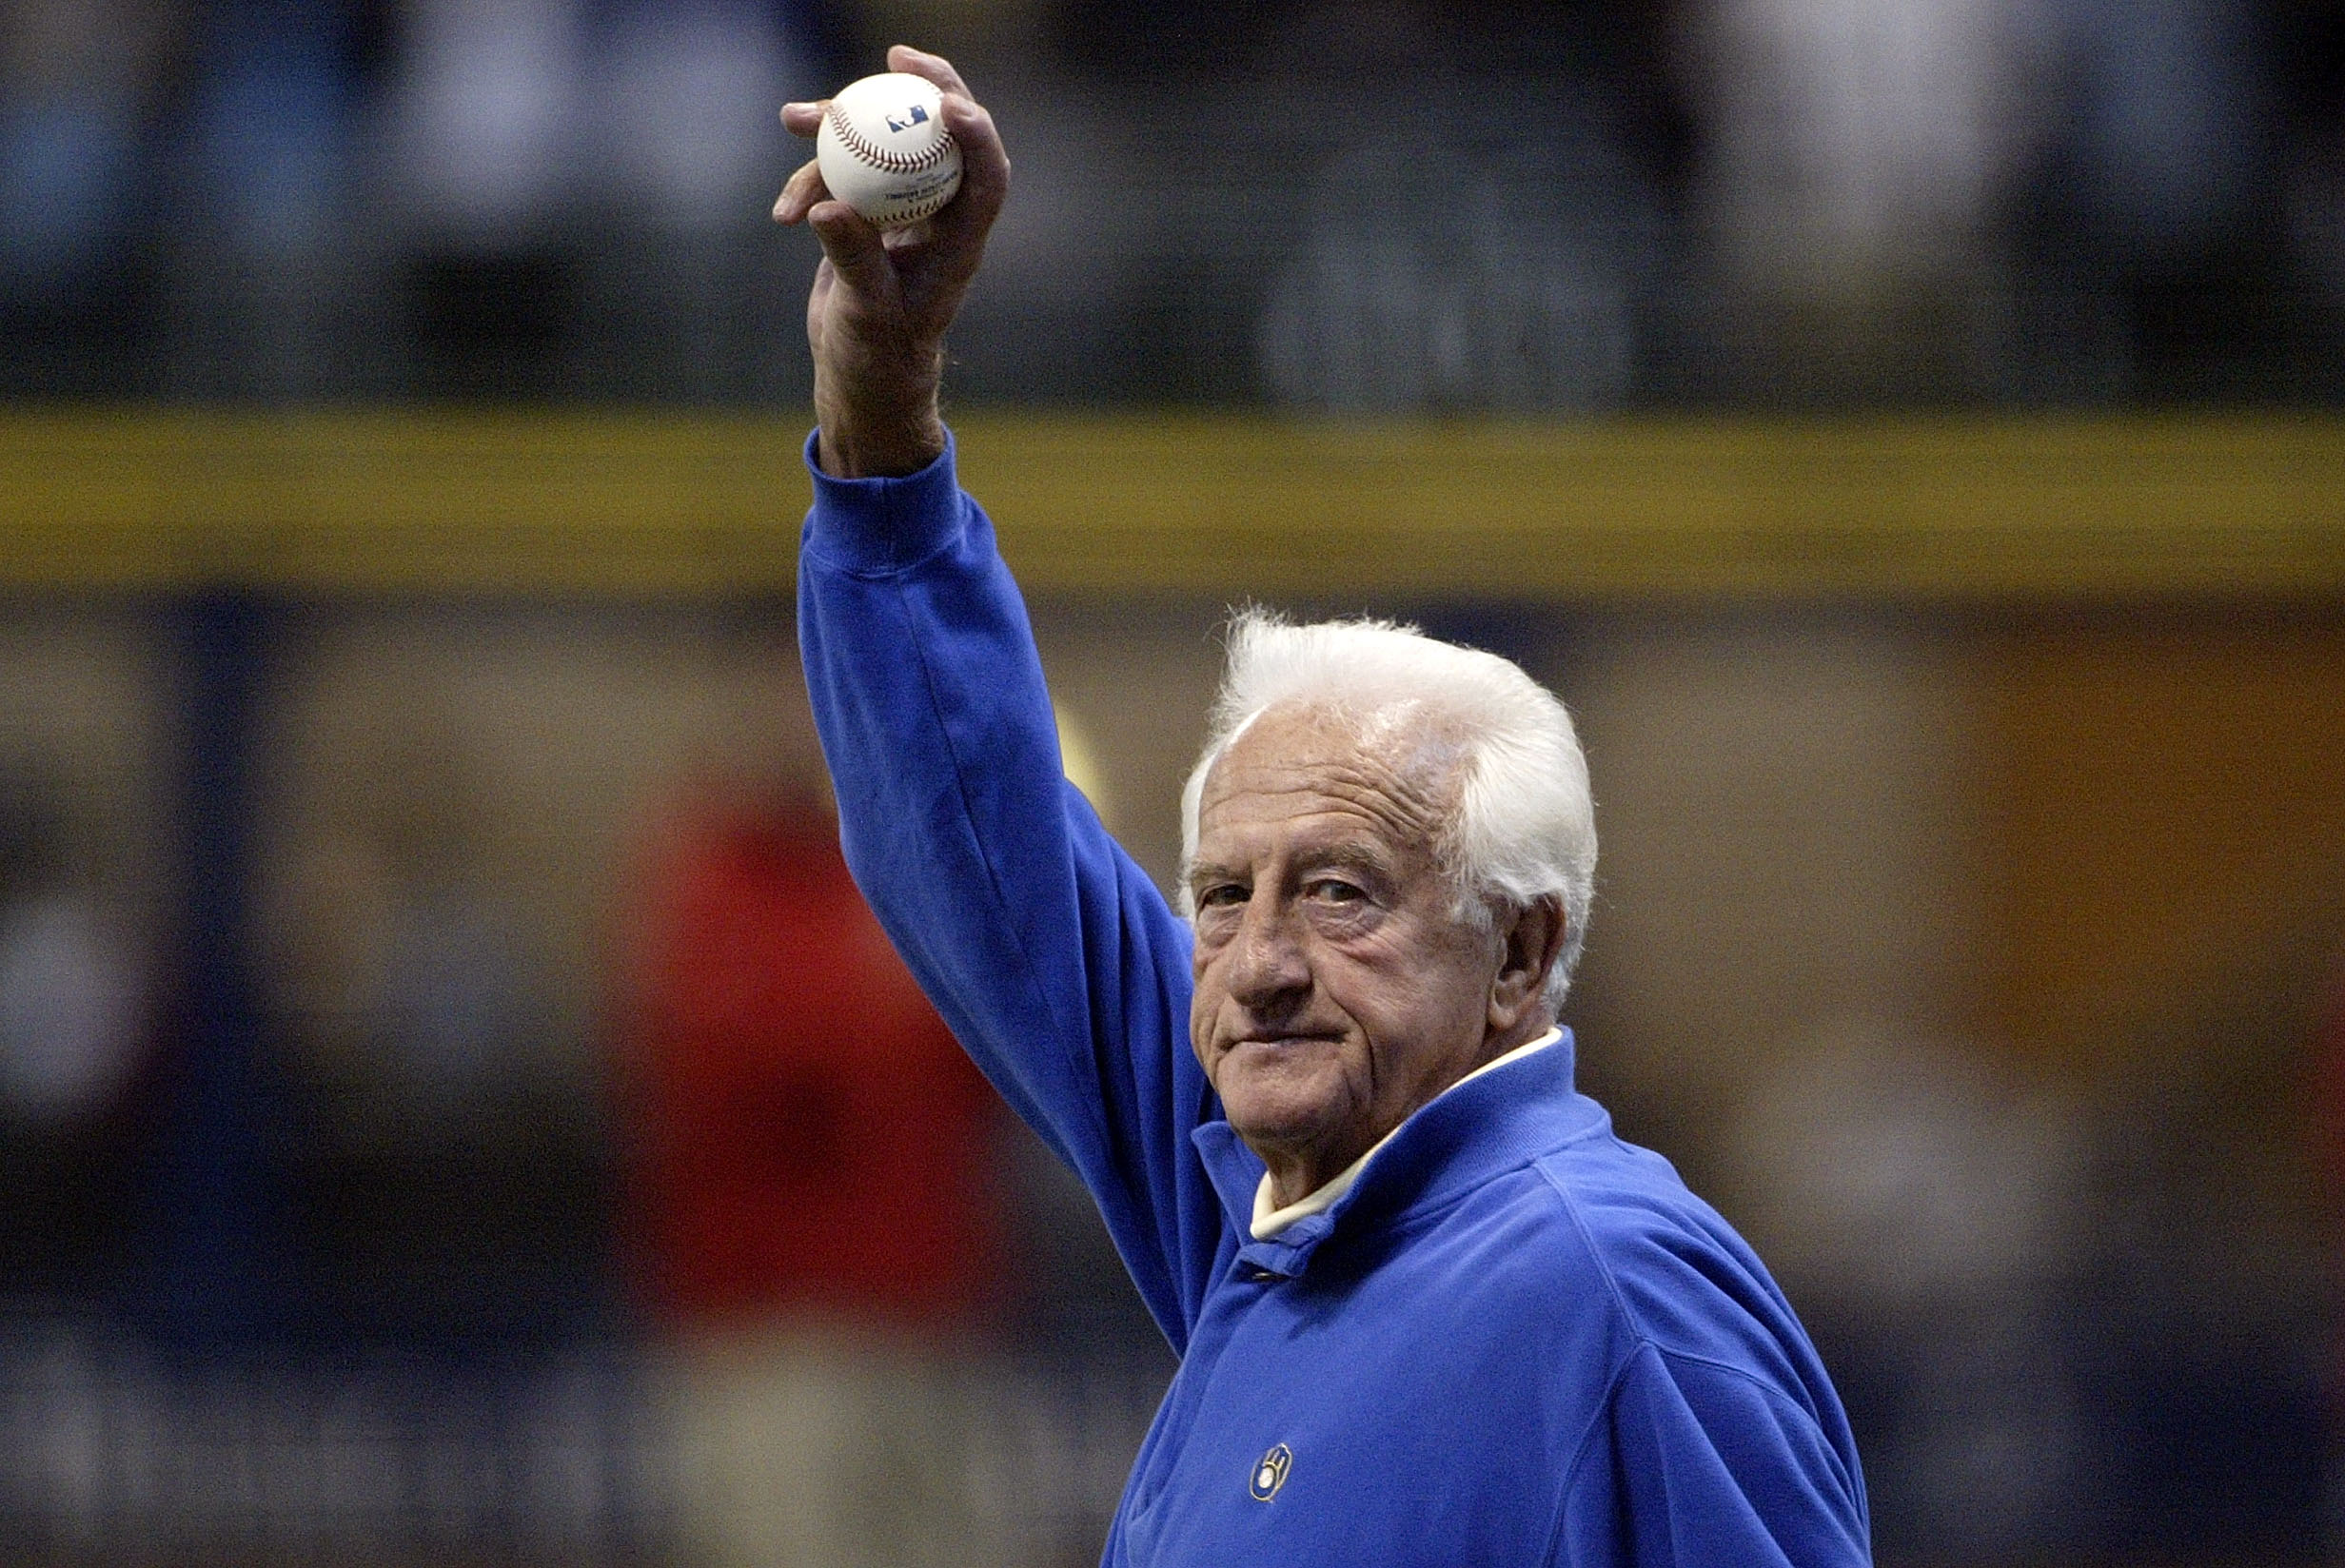 MILWAUKEE - OCTOBER 04:  Former major league baseball player Bob Uecker waves to the fans as he walks out to mound to throw out the ceremonial first pitch prior to the Milwaukee Brewers playing against the Philadelphia Phillies in Game three of the NLDS d